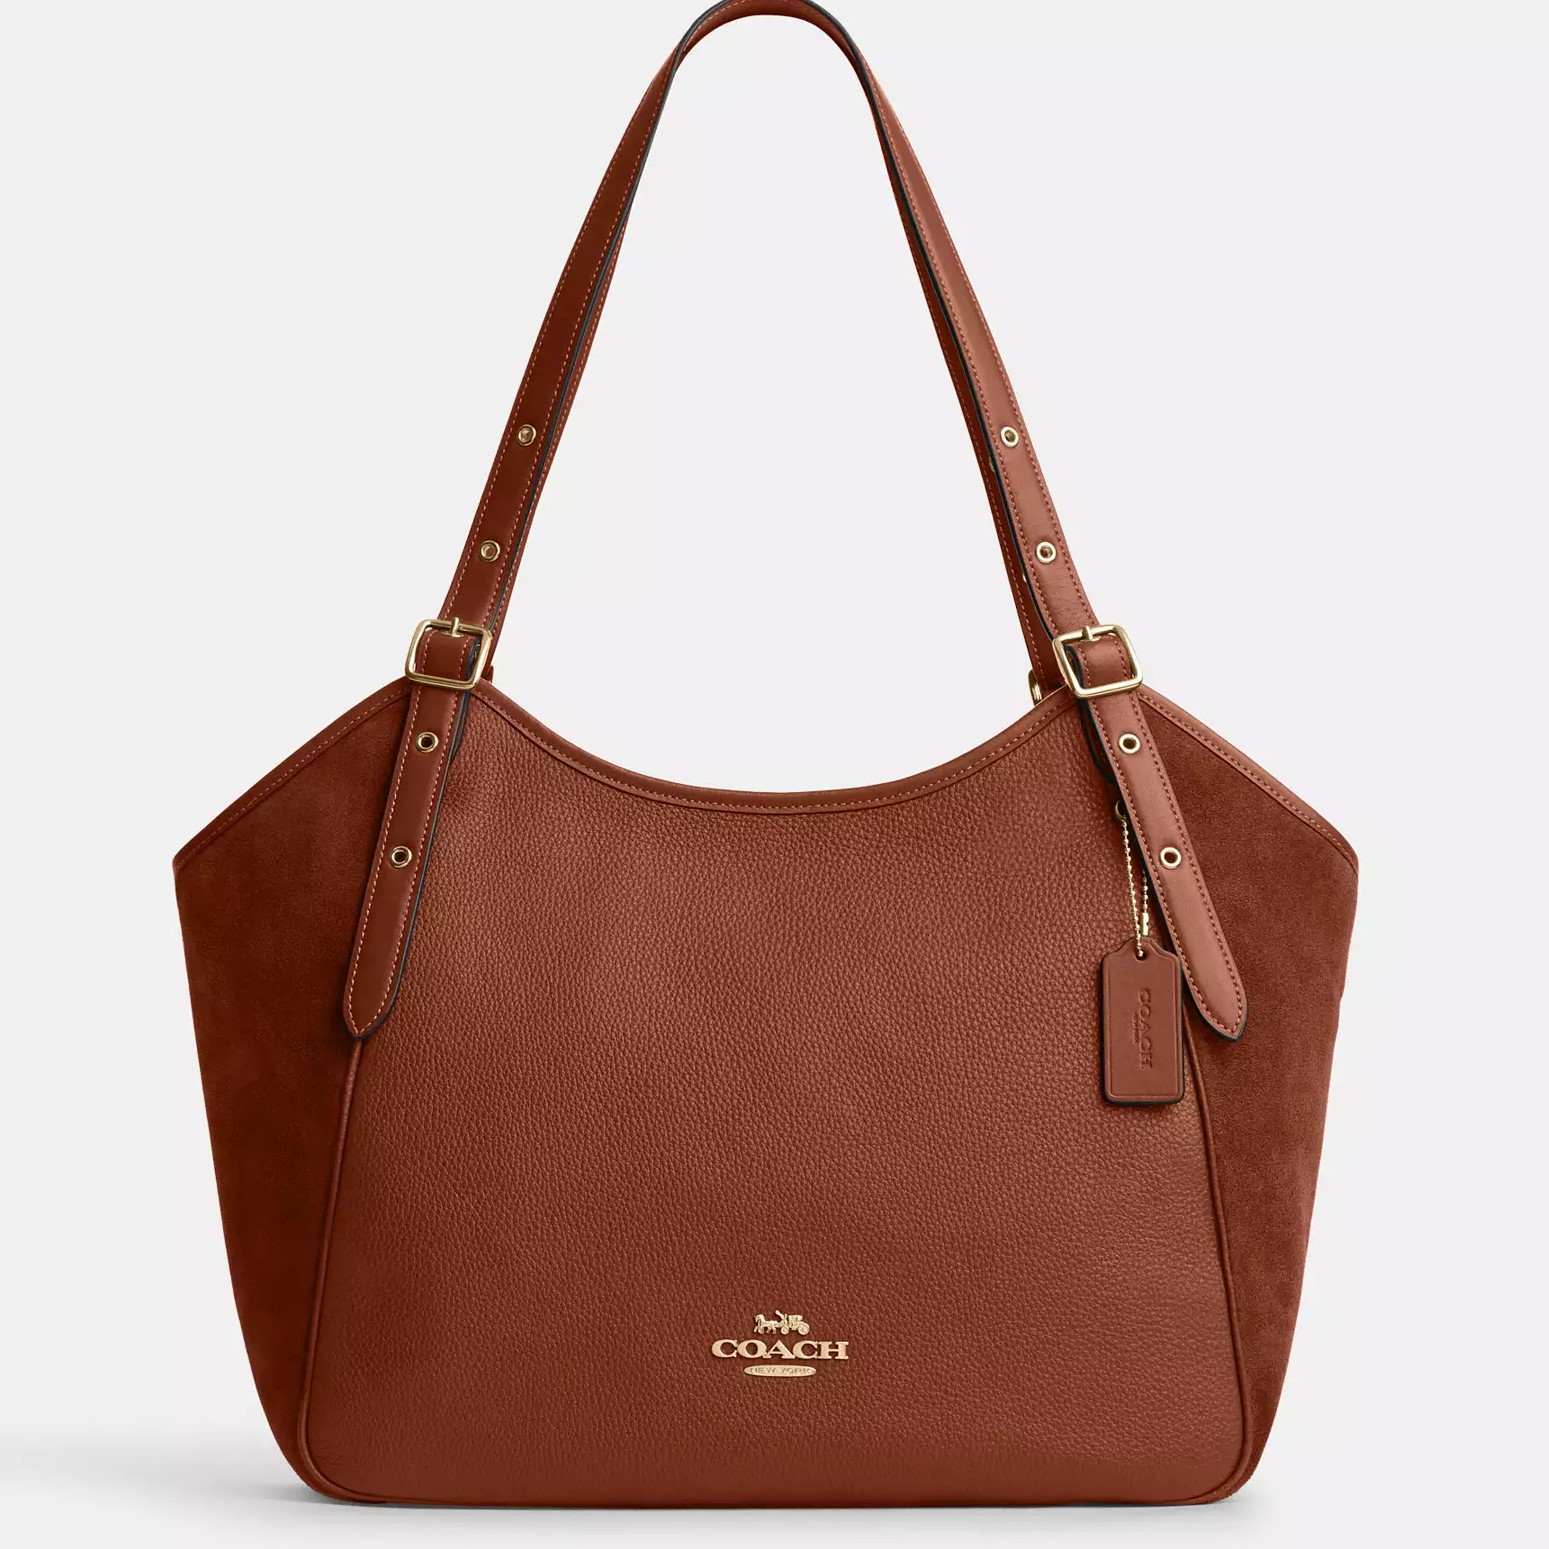 TÚI XÁCH NỮ COACH MEADOW SHOULDER BAG SUEDE AND REFINED PEBBLE LEATHER REDWOOD CM075 1